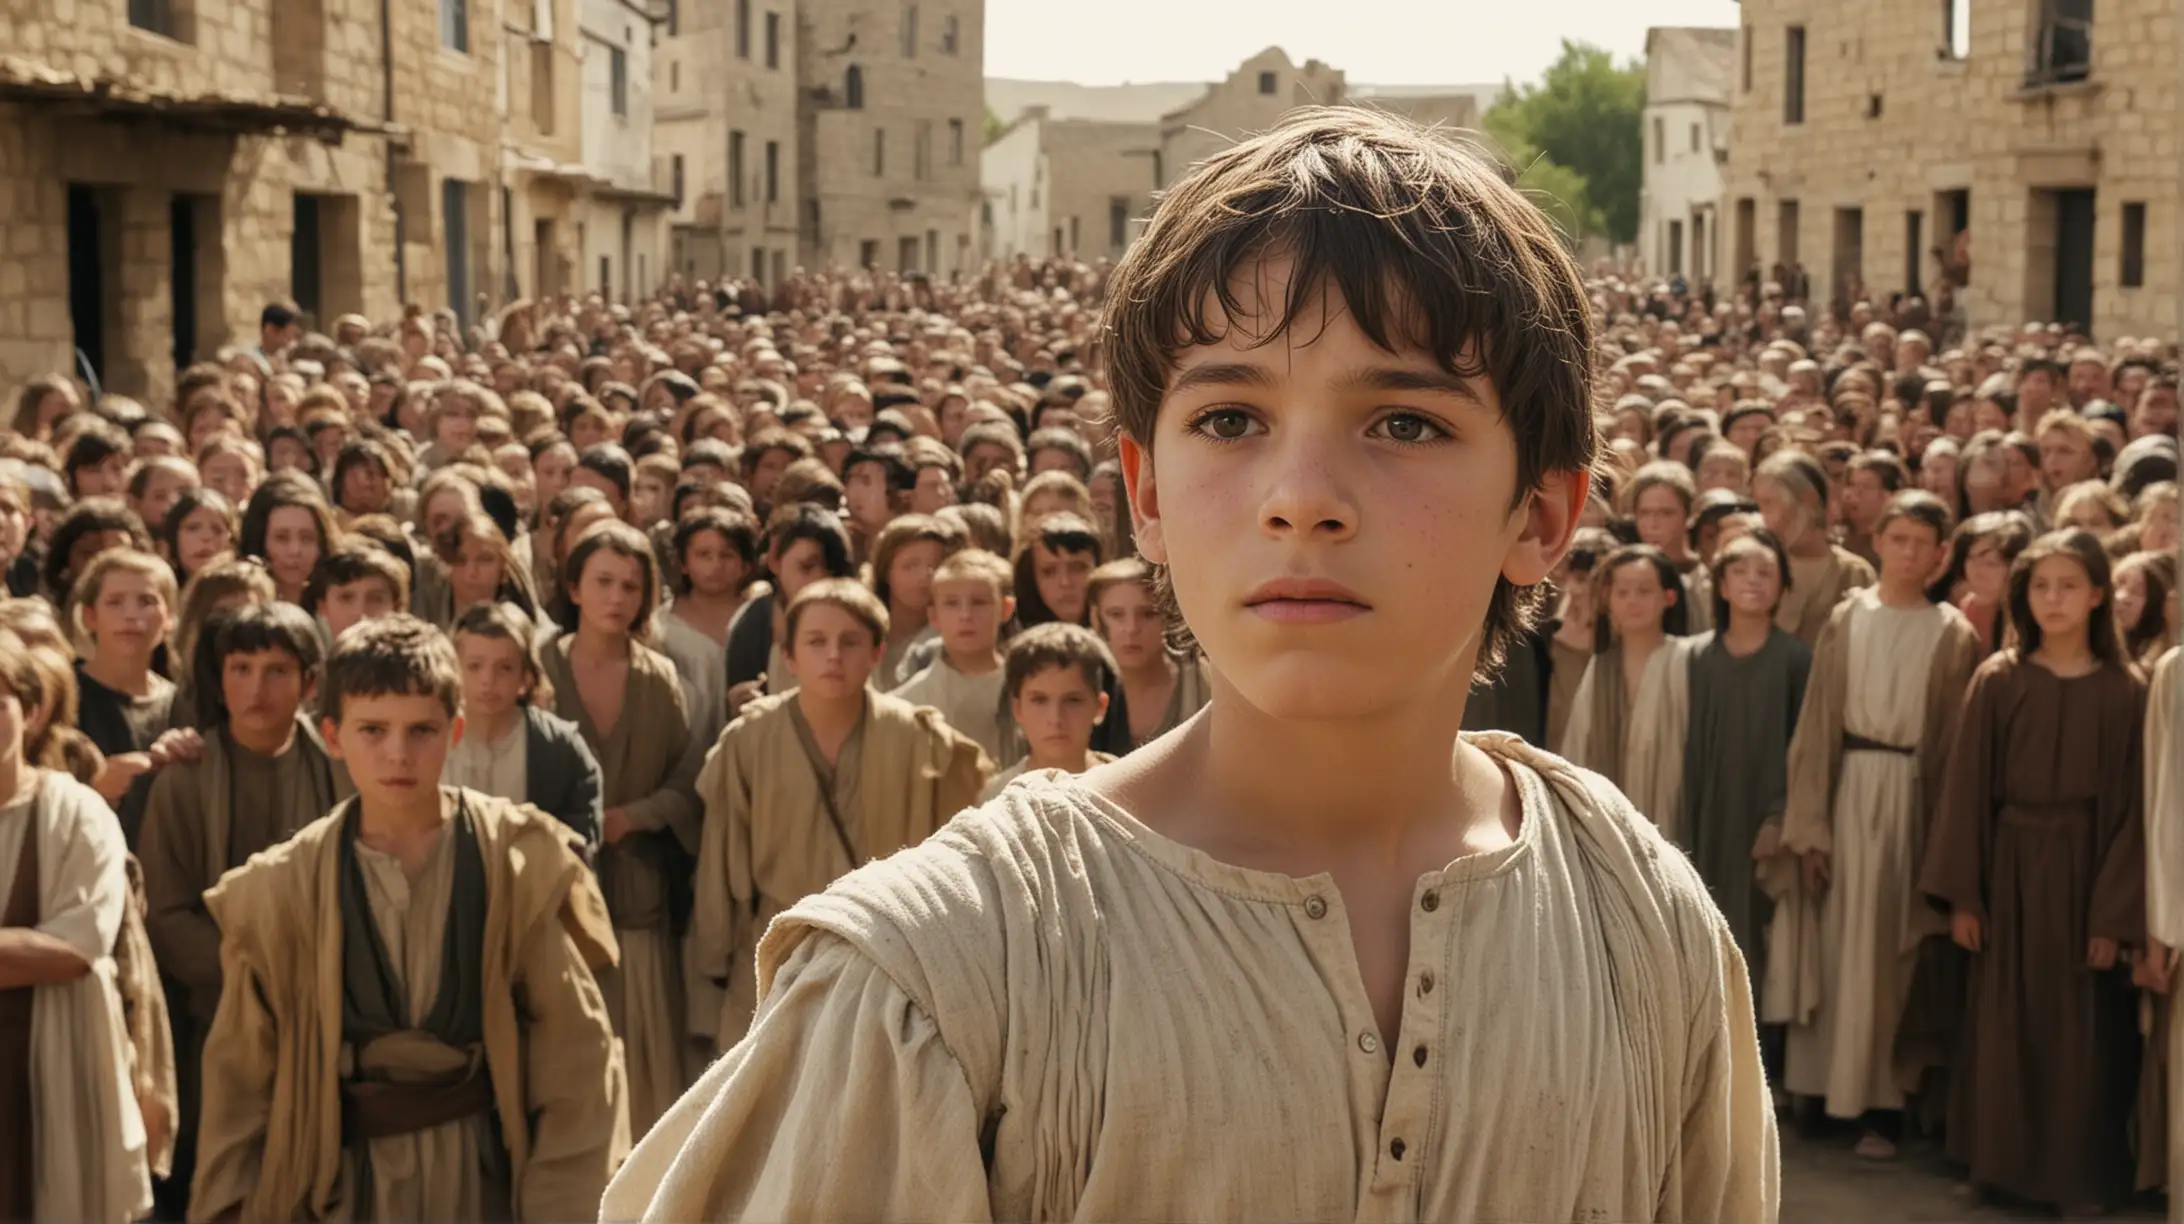 a 12 year old boy in front of a crowd in a town. Set during the biblical era of Elijah.